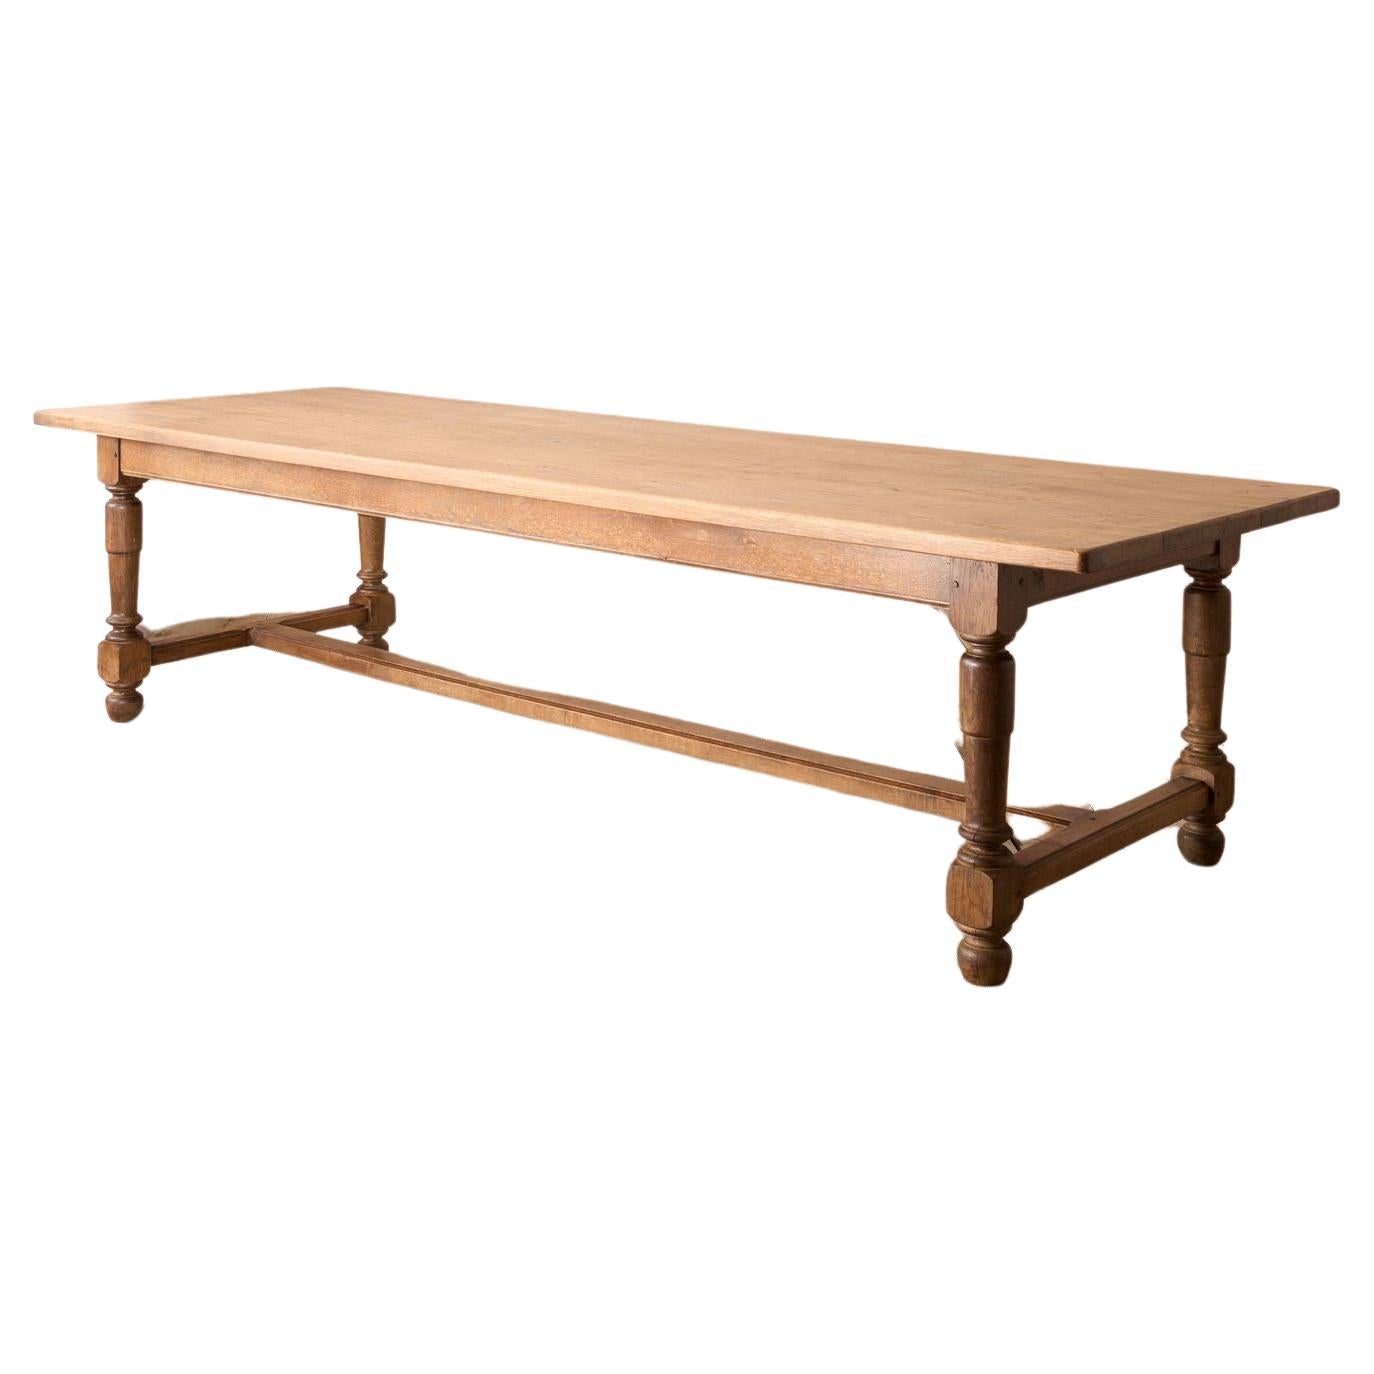 Early 20th century 3m long solid oak dining table